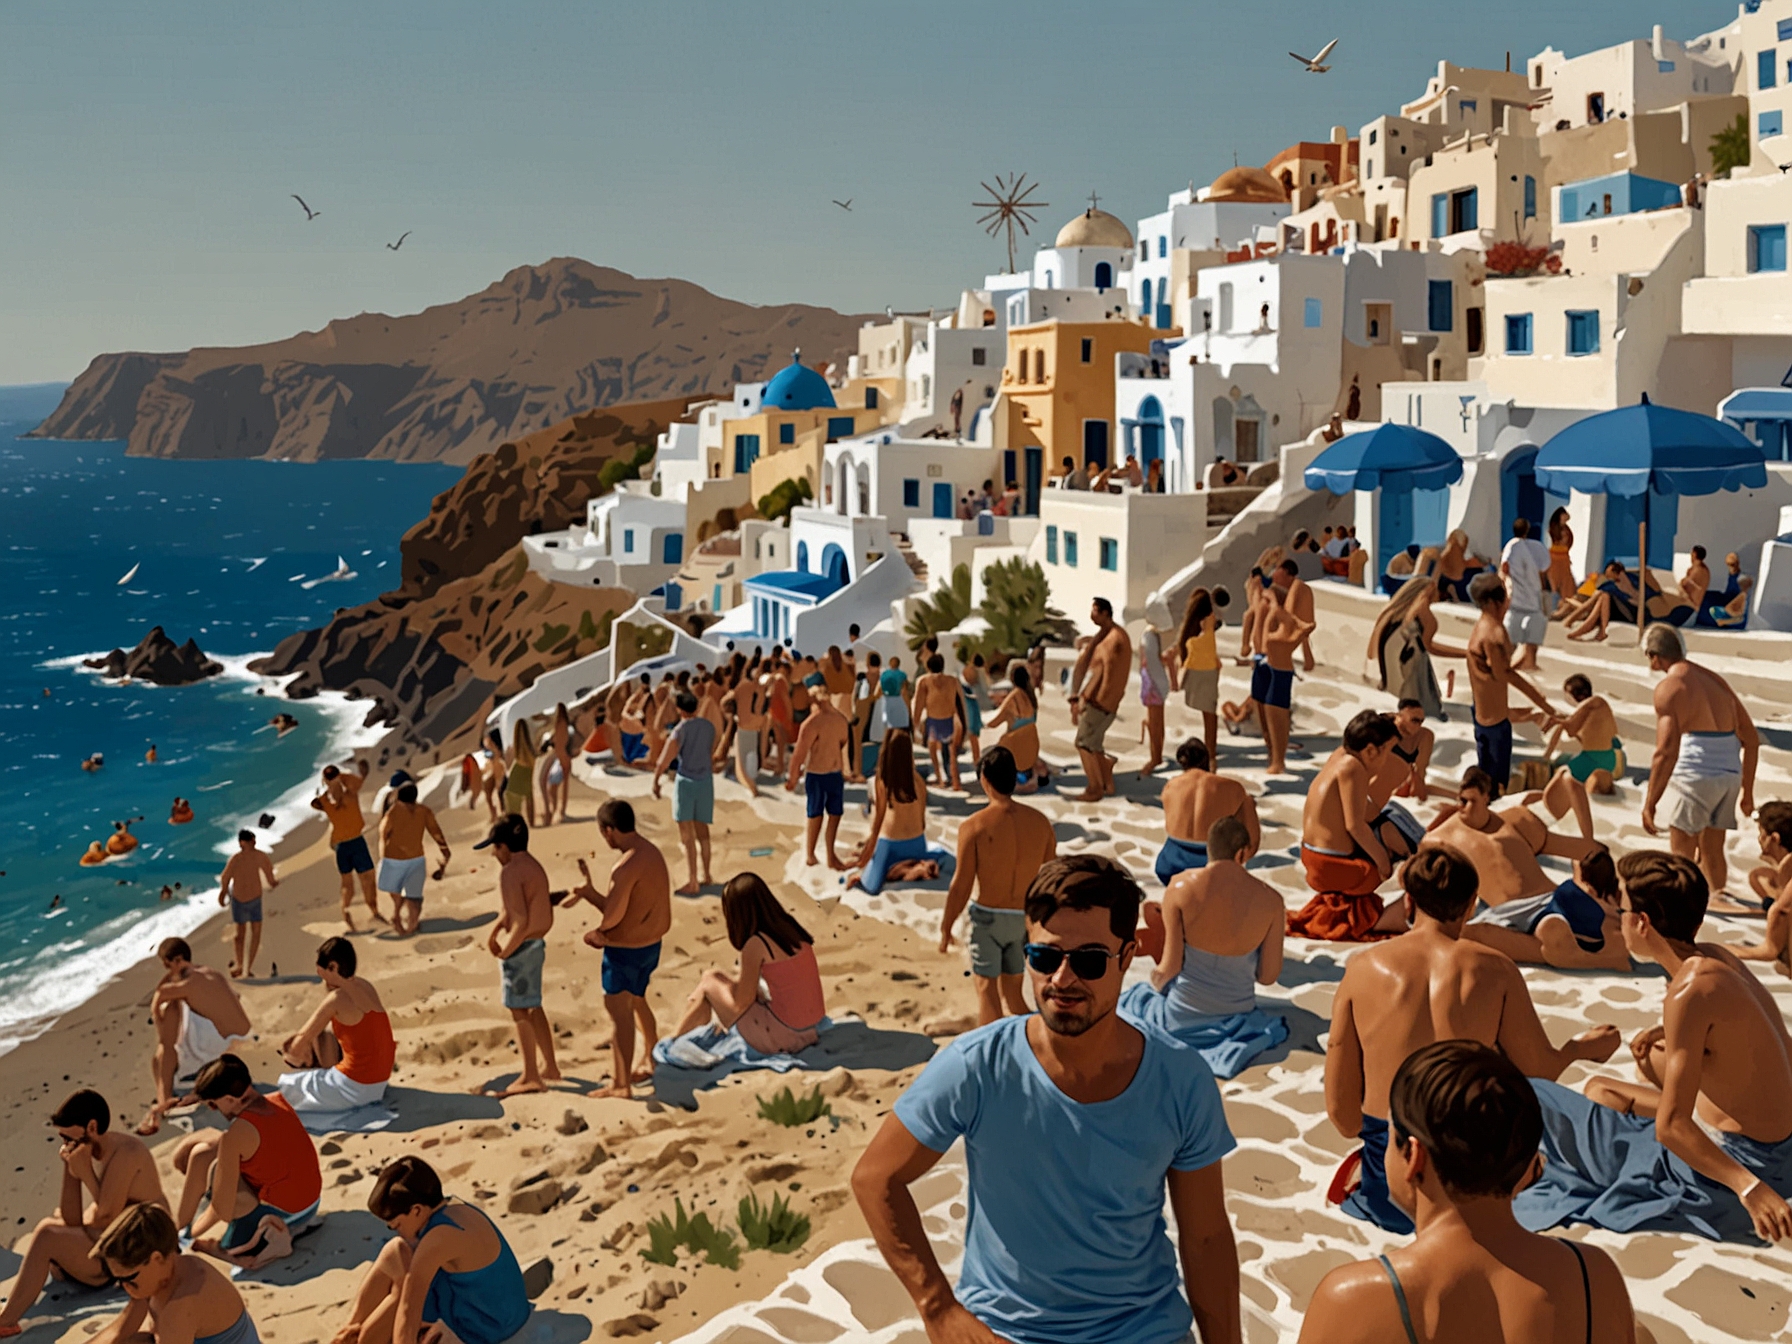 A photograph of Santorini's beaches crowded with tourists during peak season. The image illustrates the impact of over-tourism on the environment and the challenges of sustainable tourism.